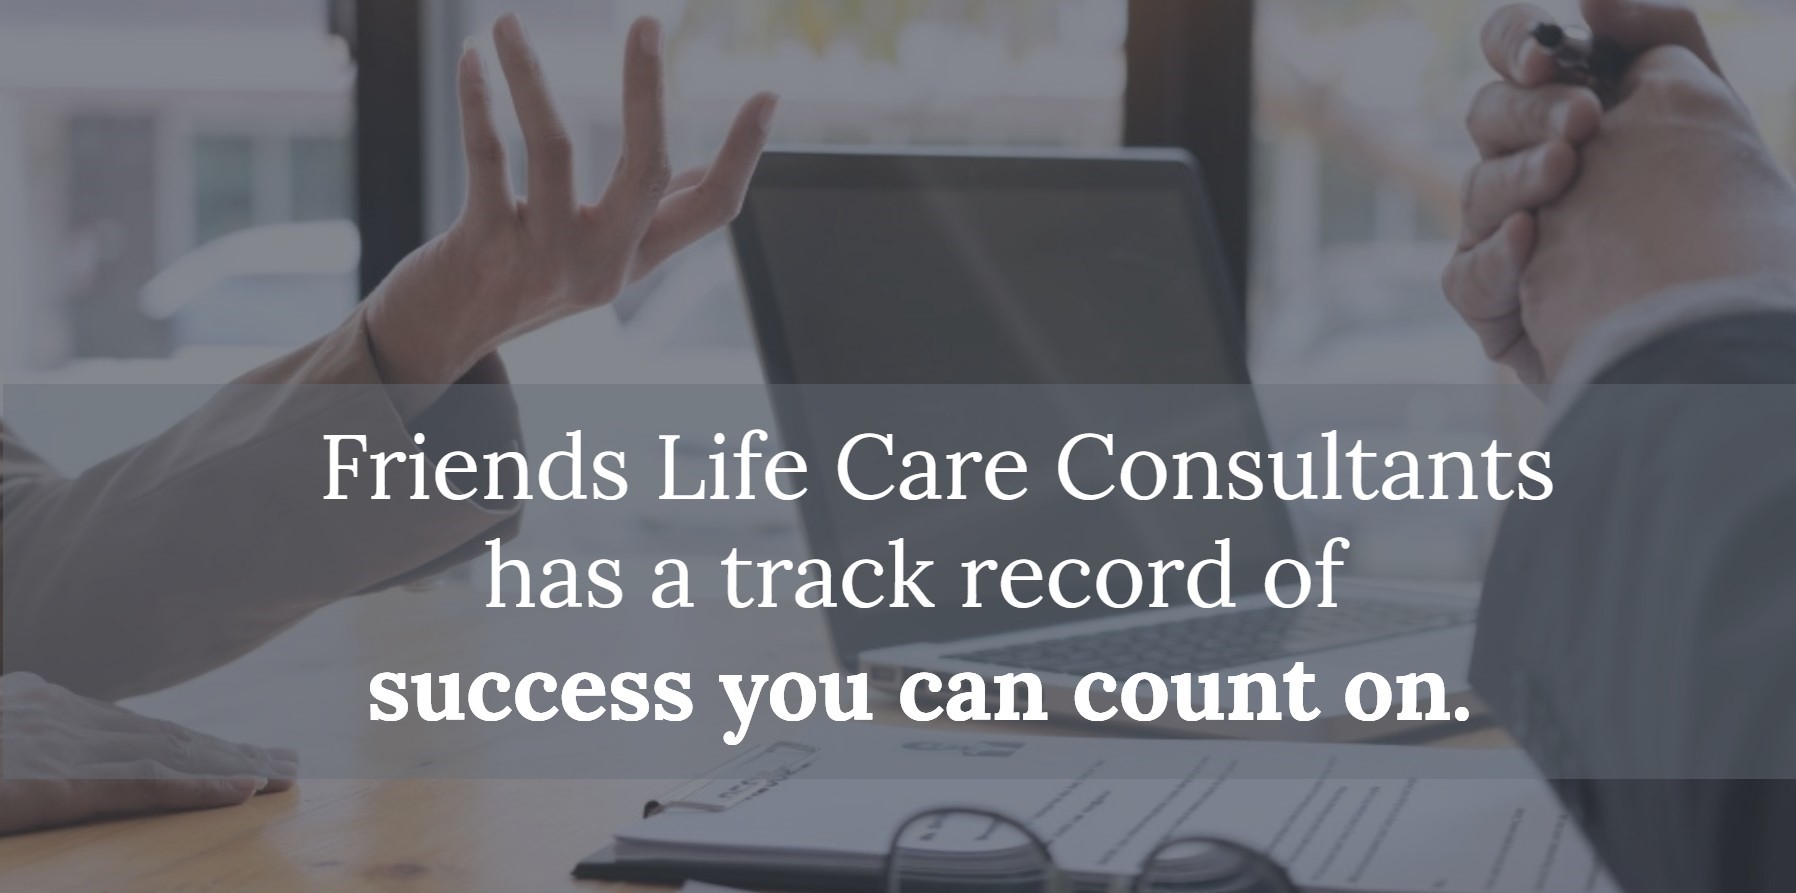 Friends Life Care Consultants has a track record of success you can count on.